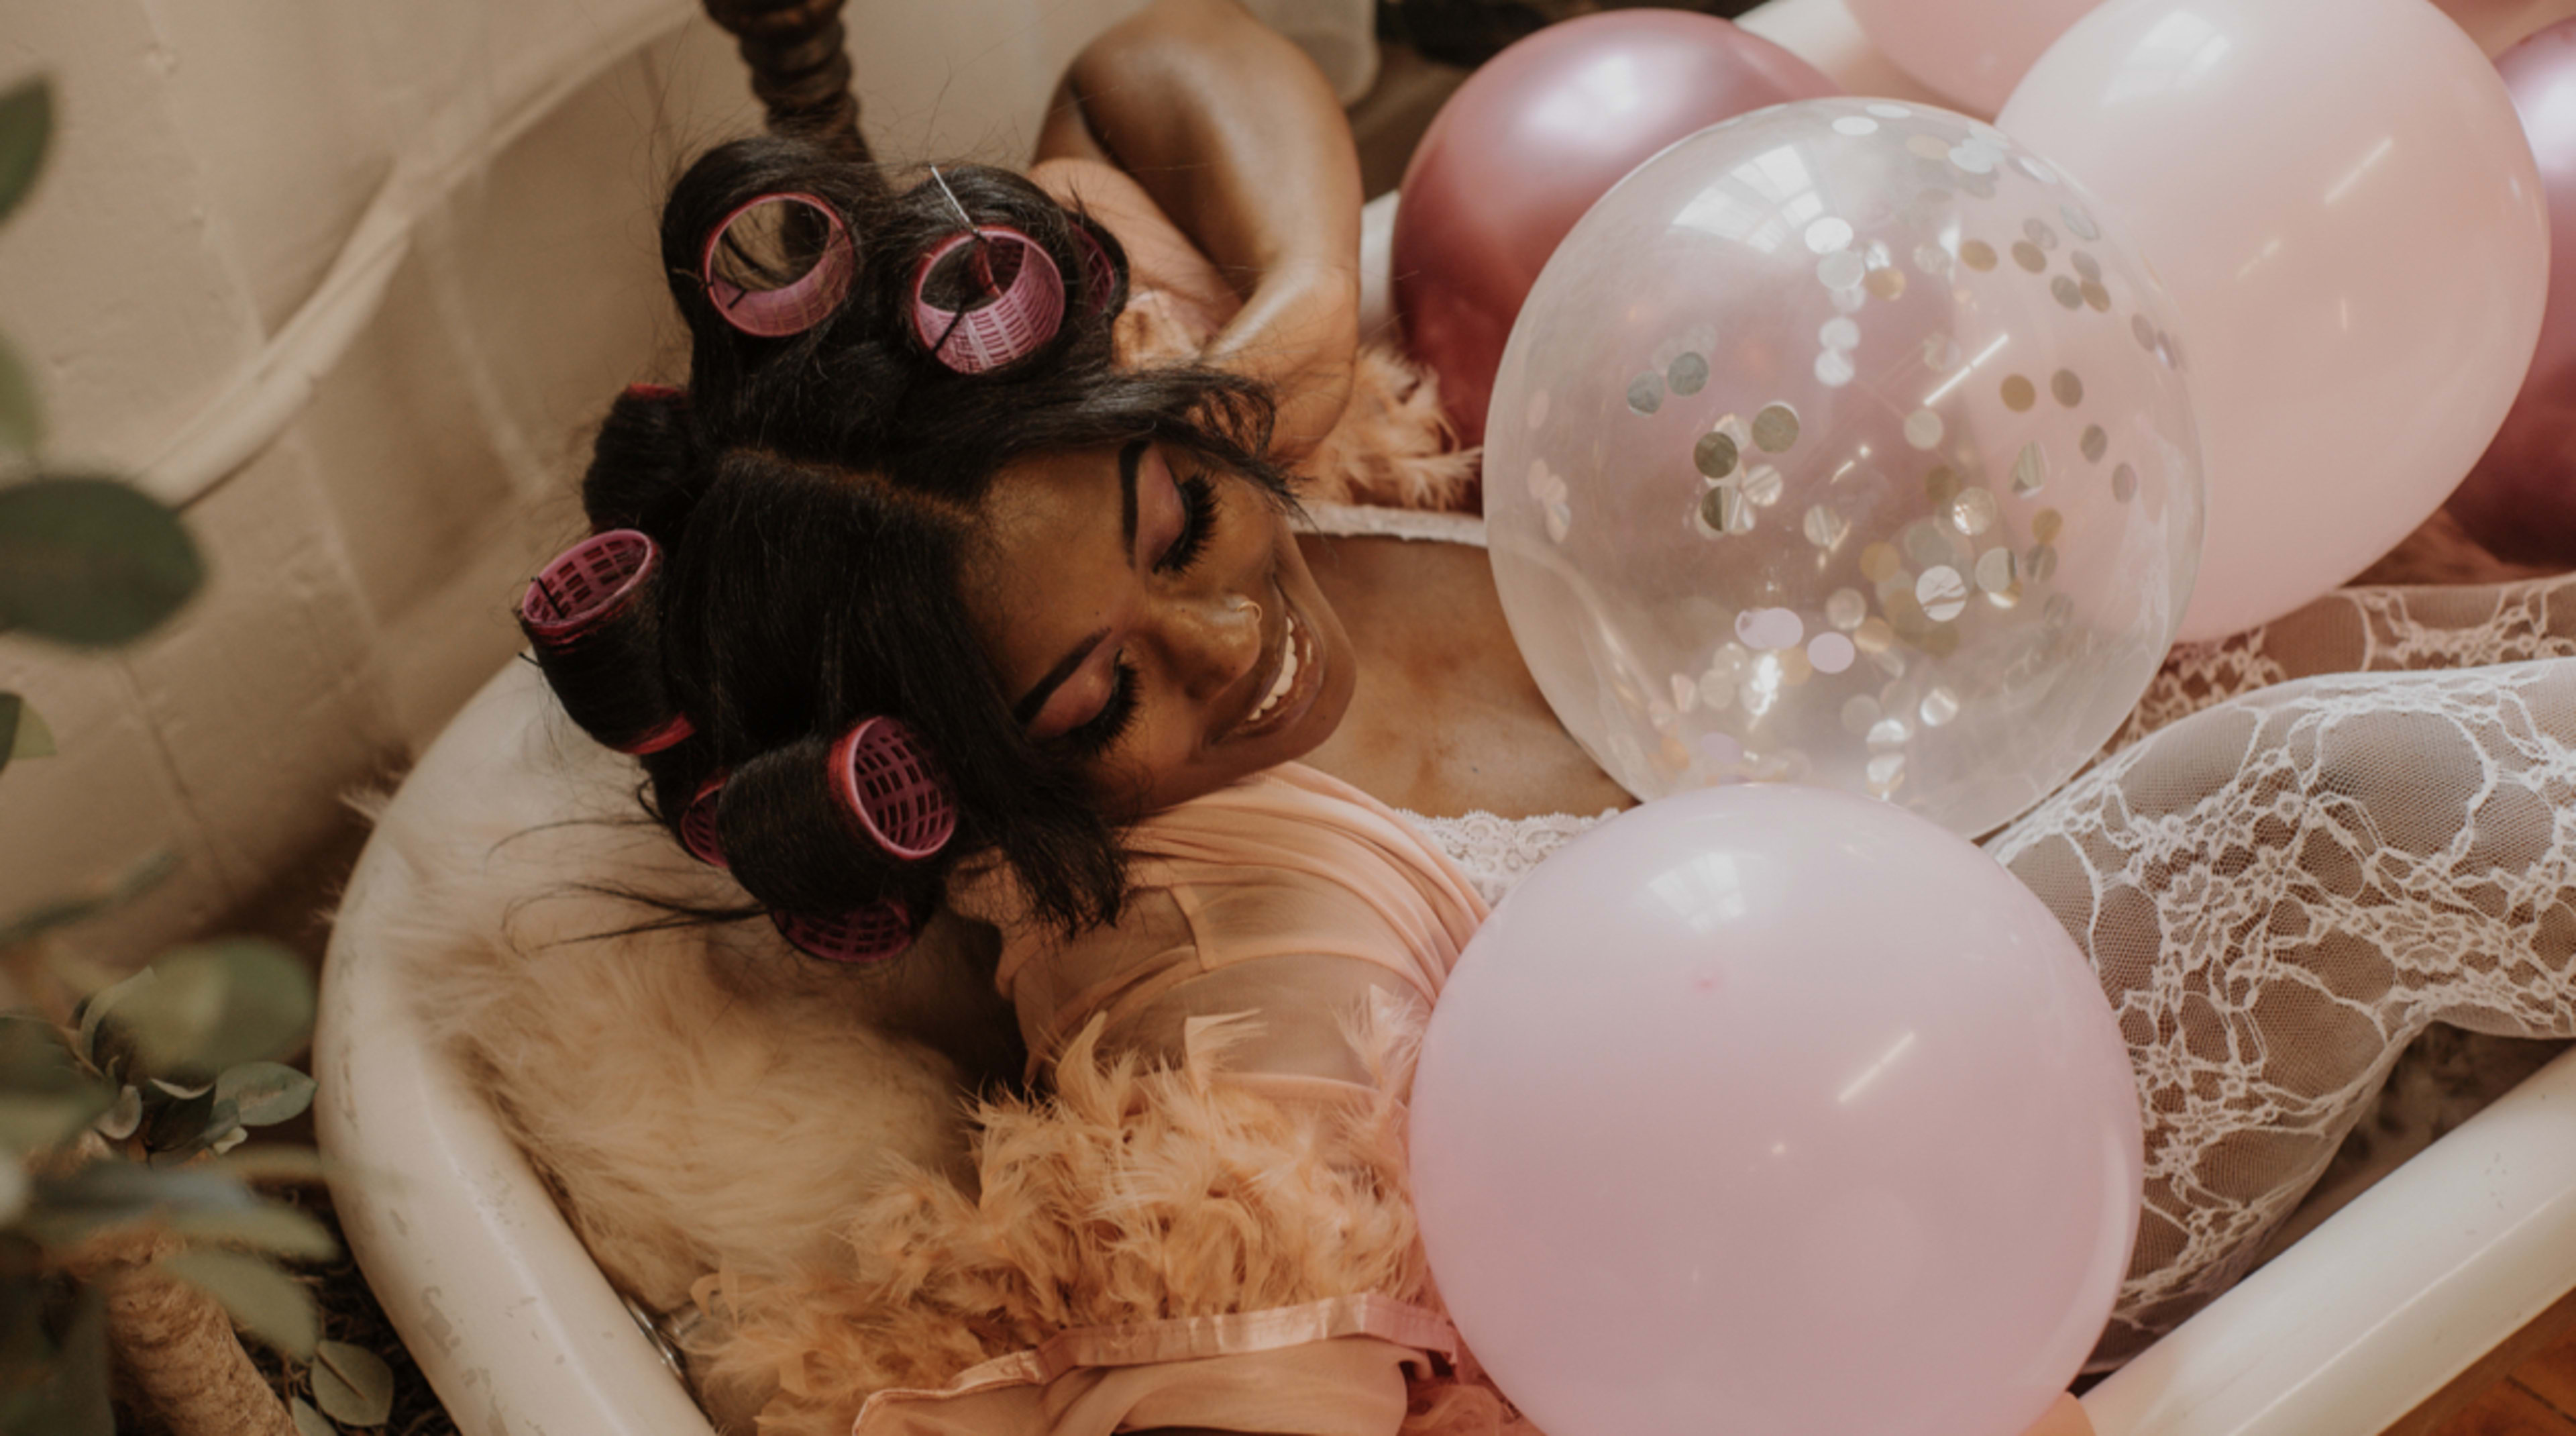 A boudoir photoshoot featuring a woman laying in a bathtub surrounded by rustic beige and pink balloons.